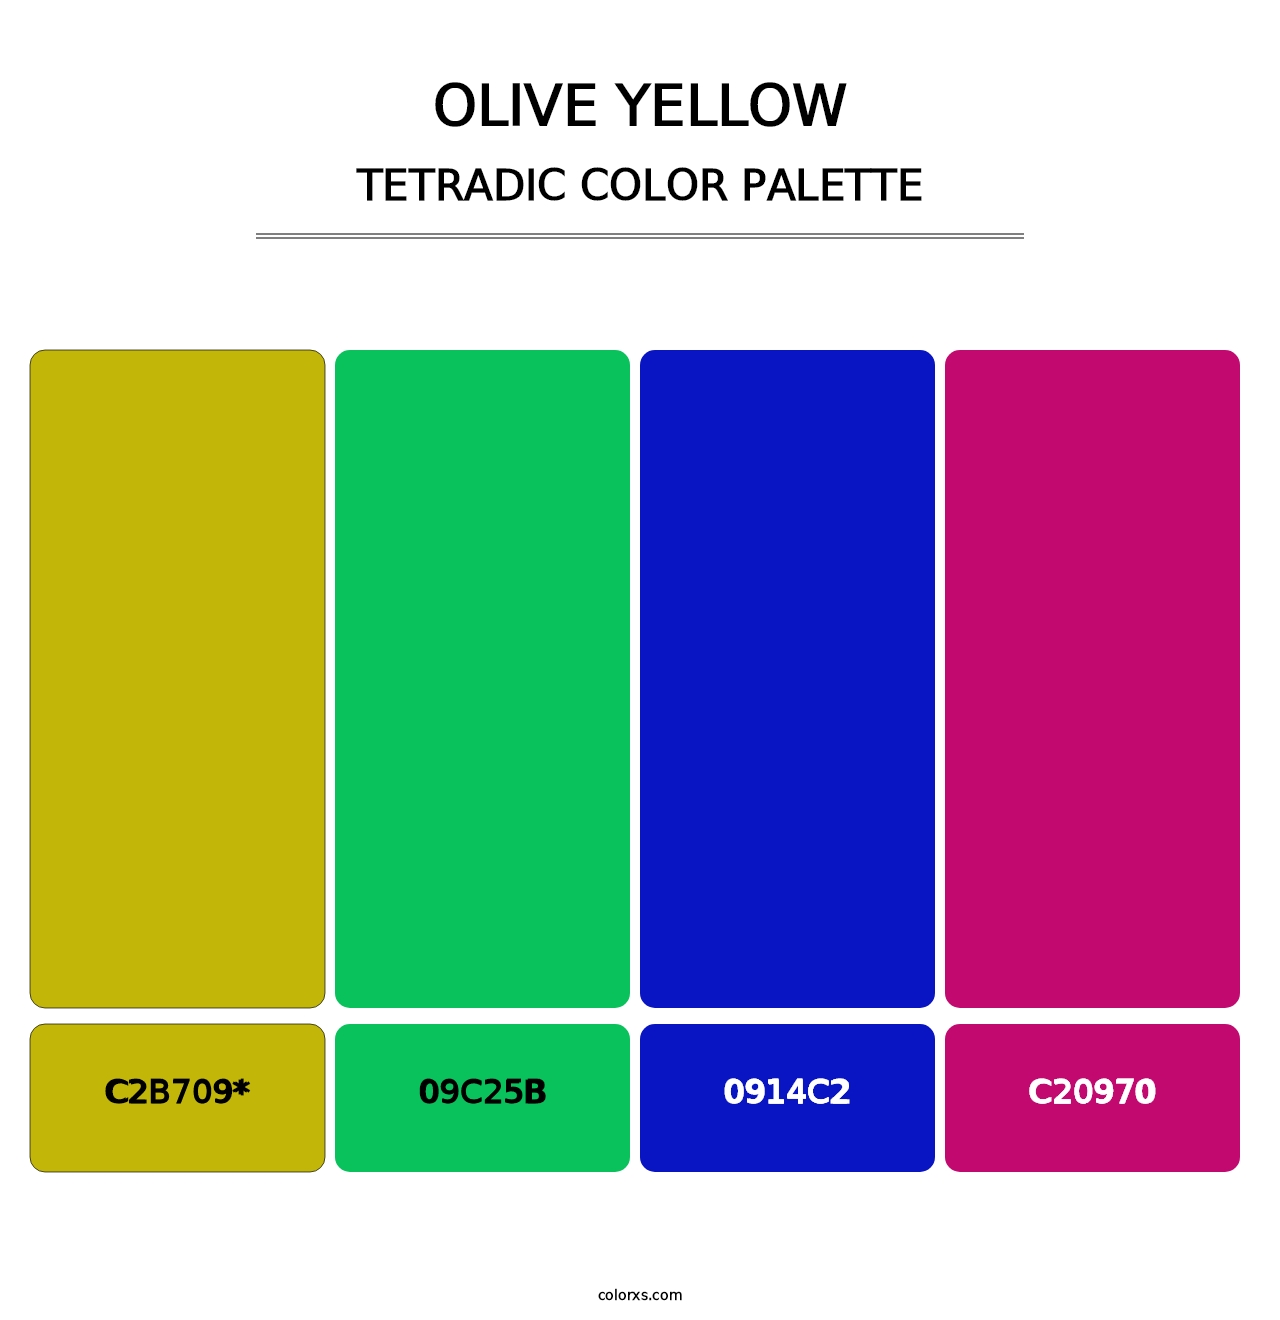 Olive Yellow - Tetradic Color Palette